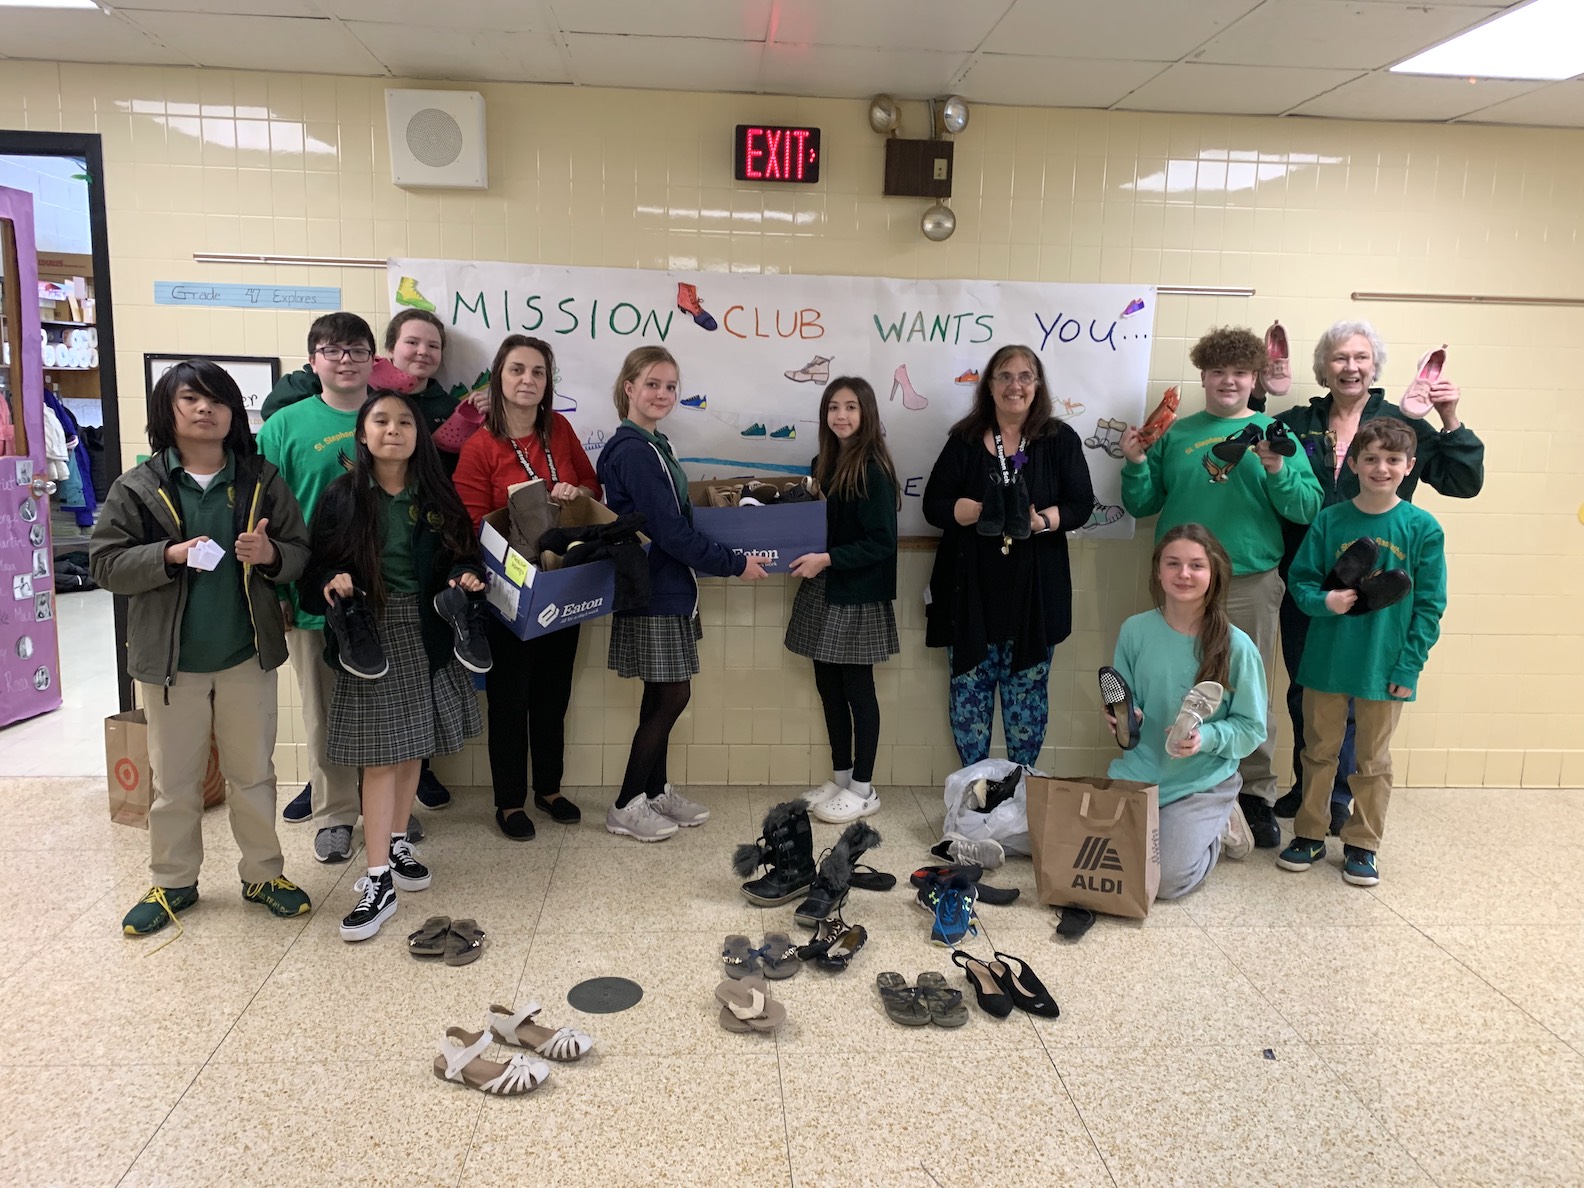 Student members of the St. Stephen School mission club collecting shoes from fellow students in a show of true community fellowship. (Photo courtesy of Grand Island Rotary Club)